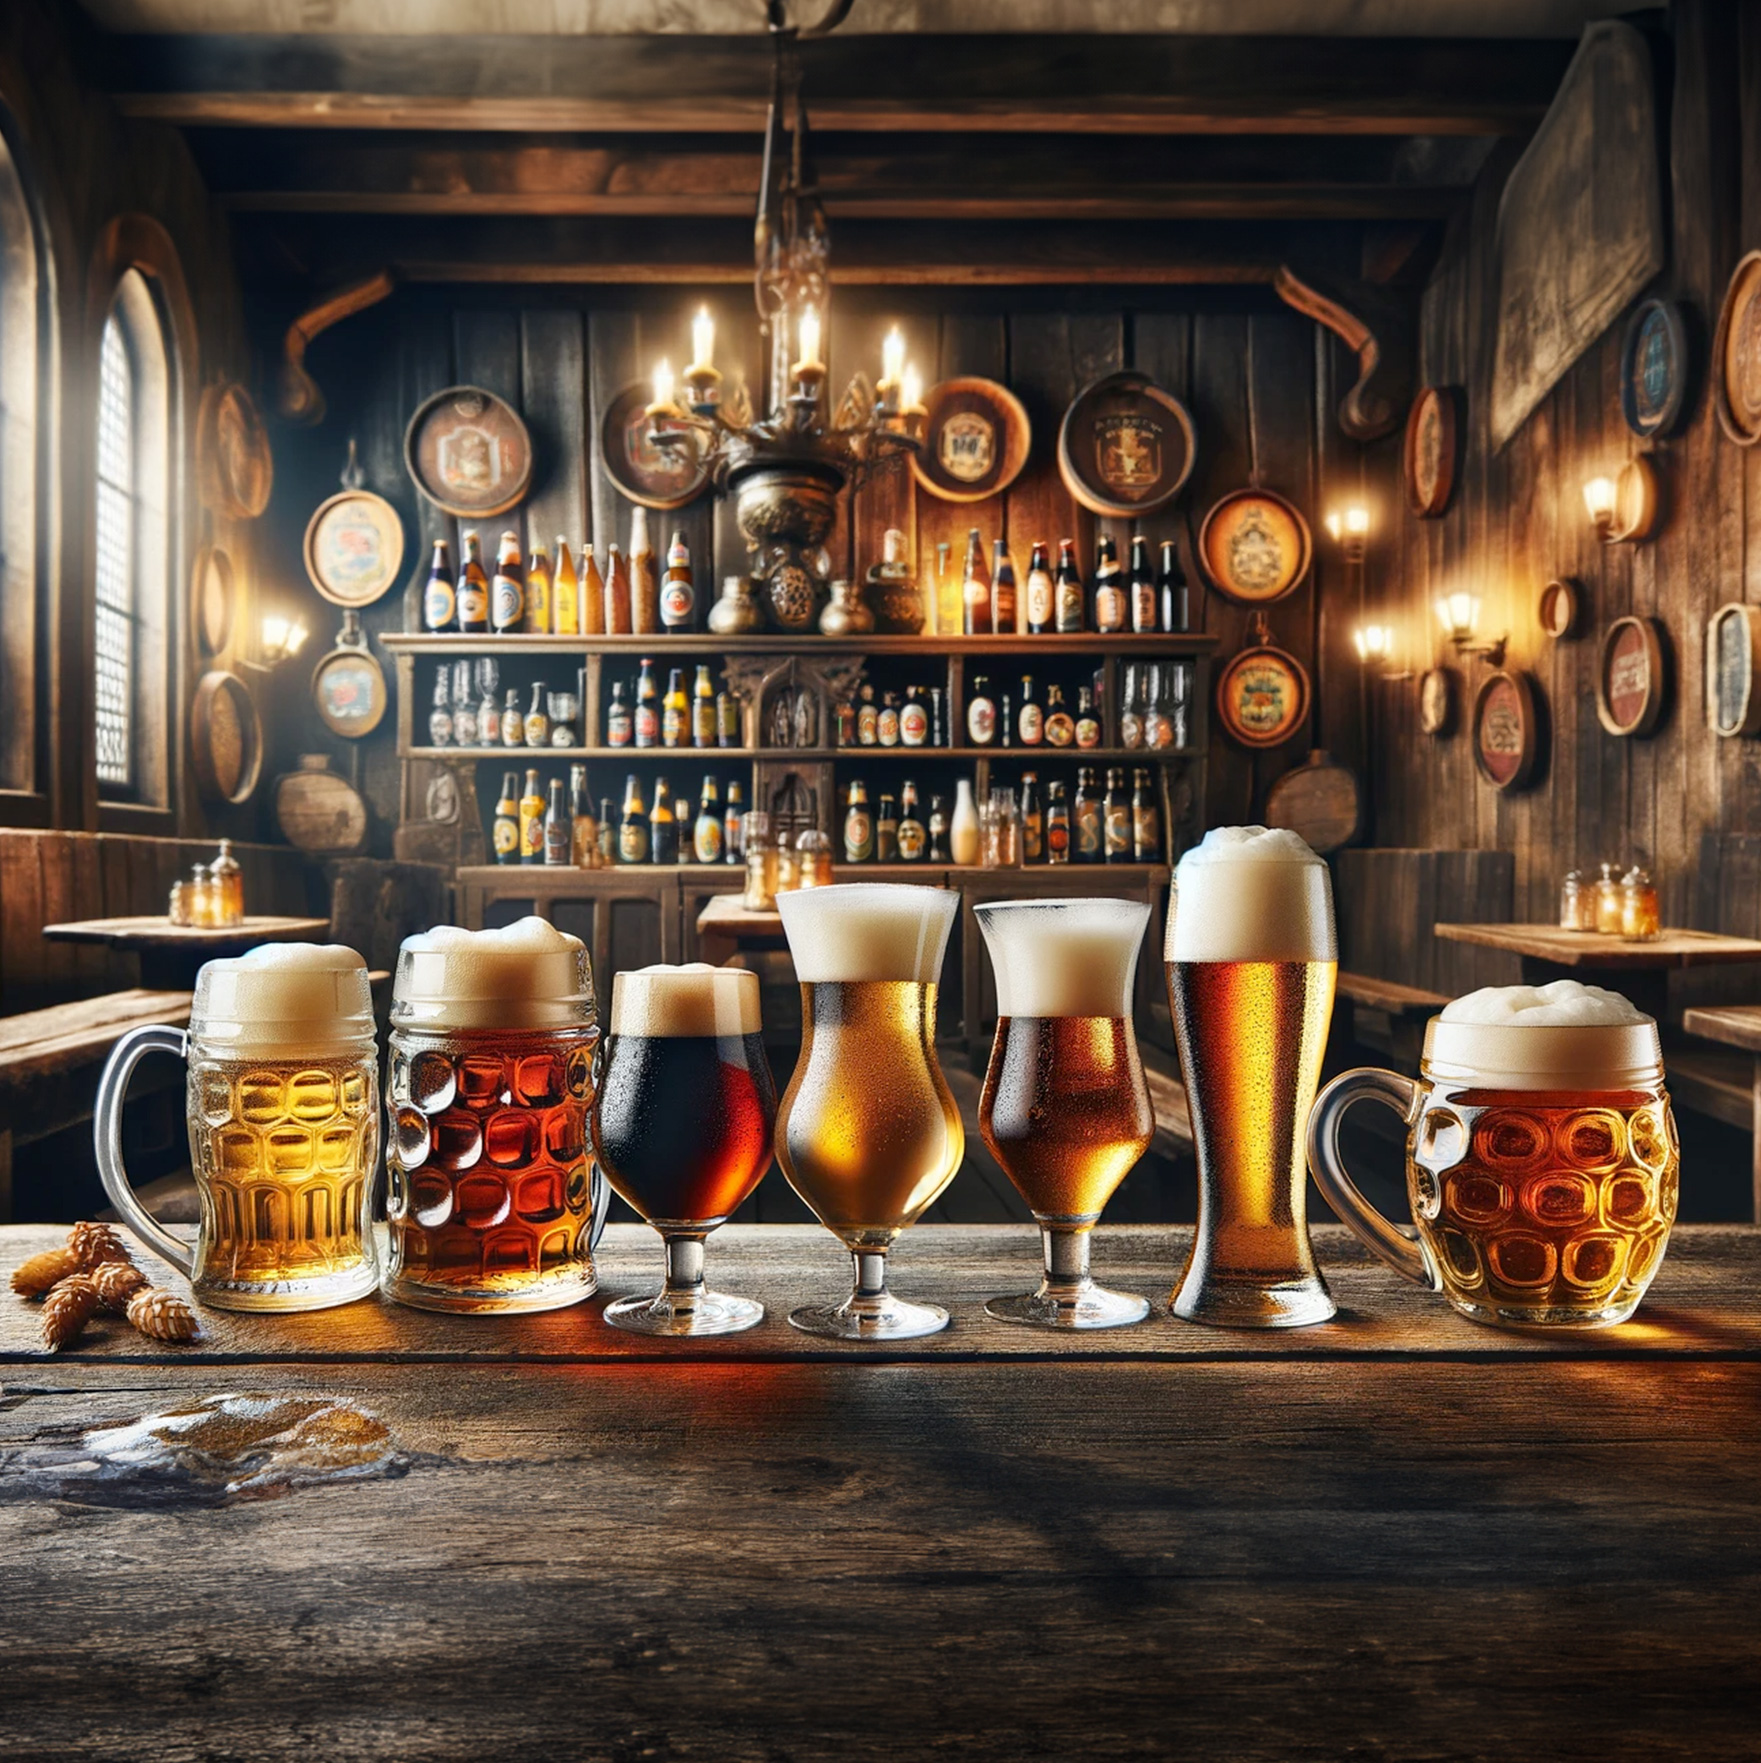 Maltese – The Place to Beer